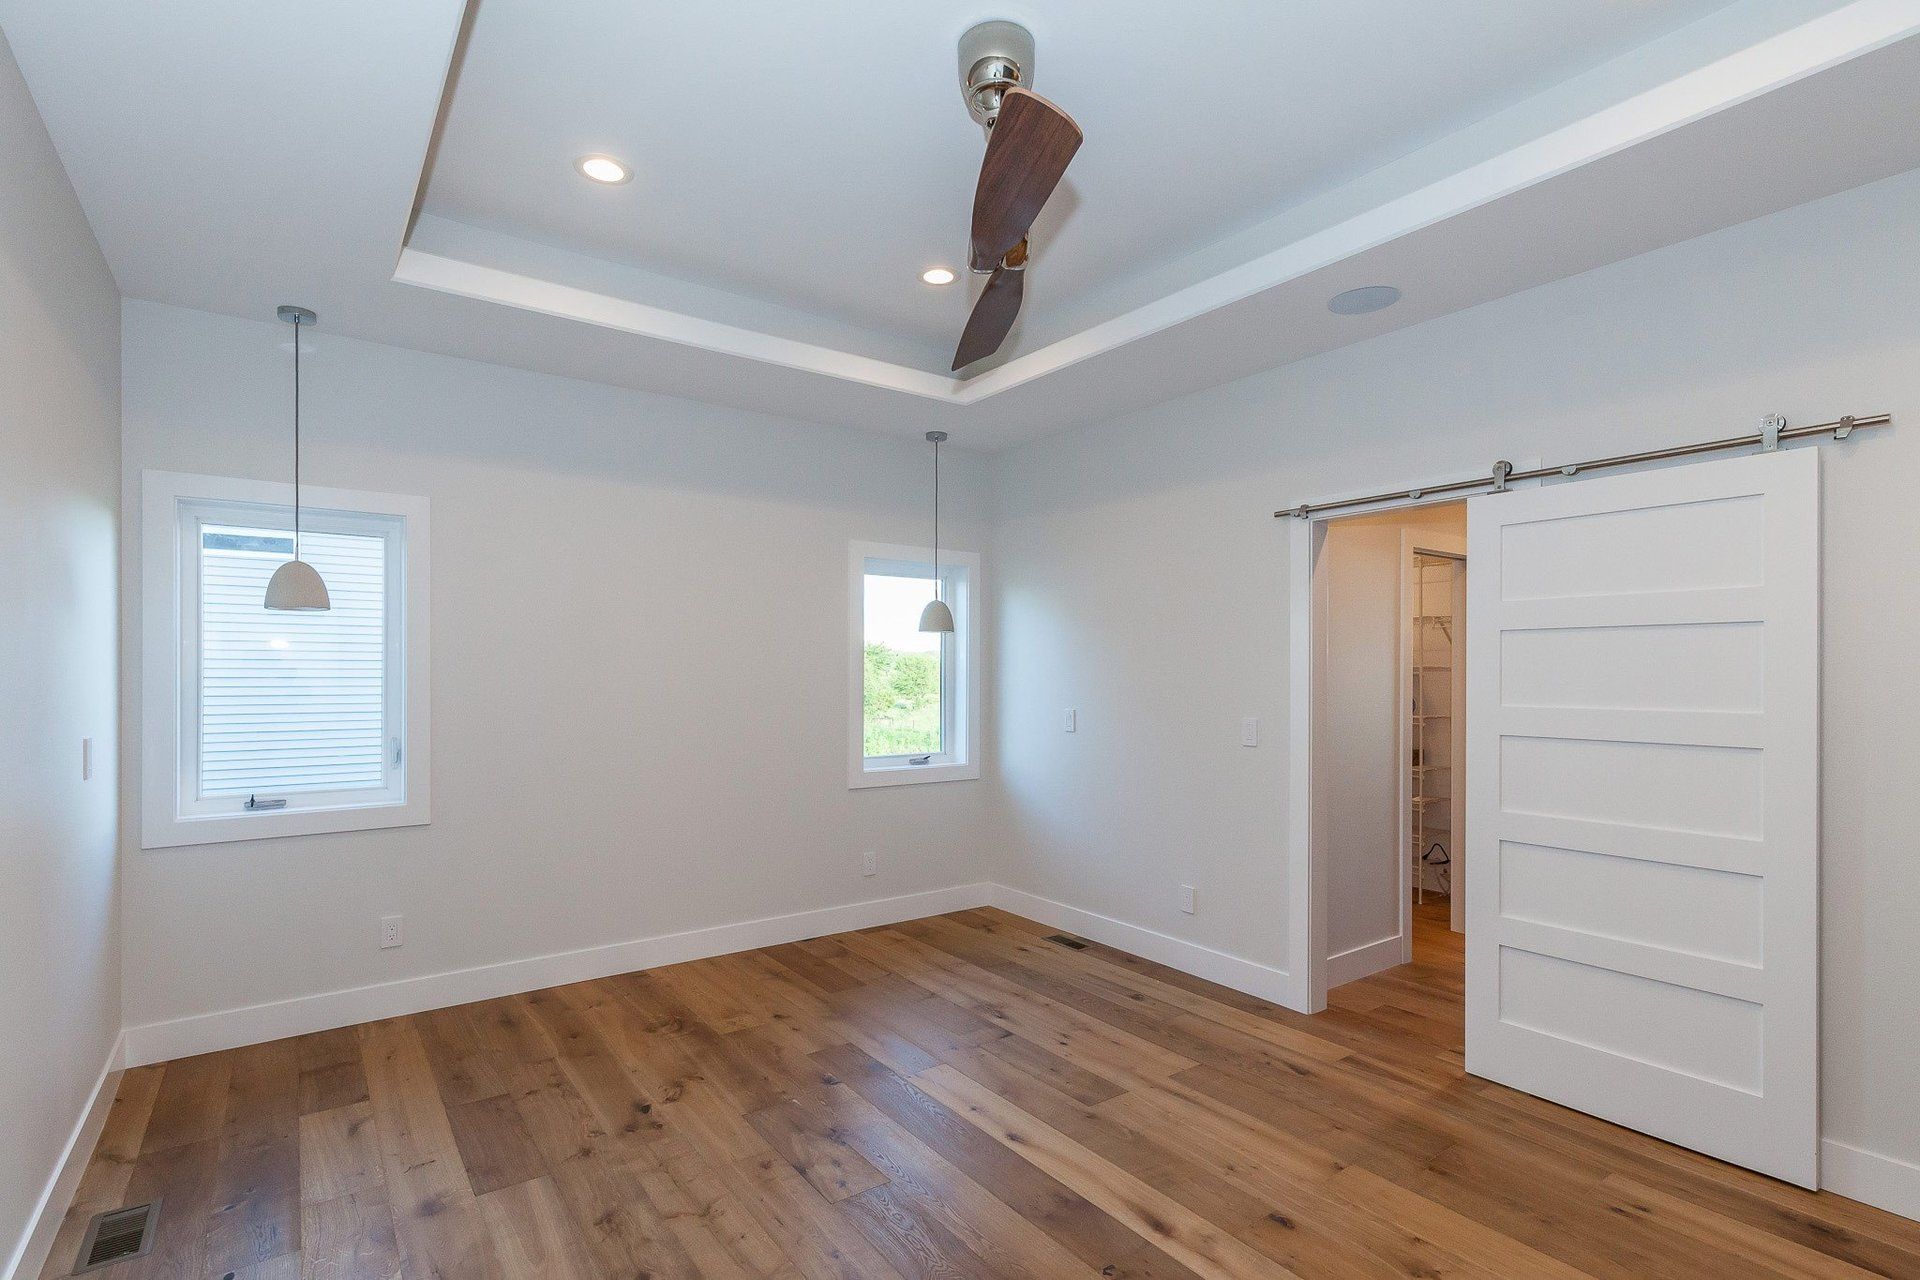 empty room and brown ceiling fan